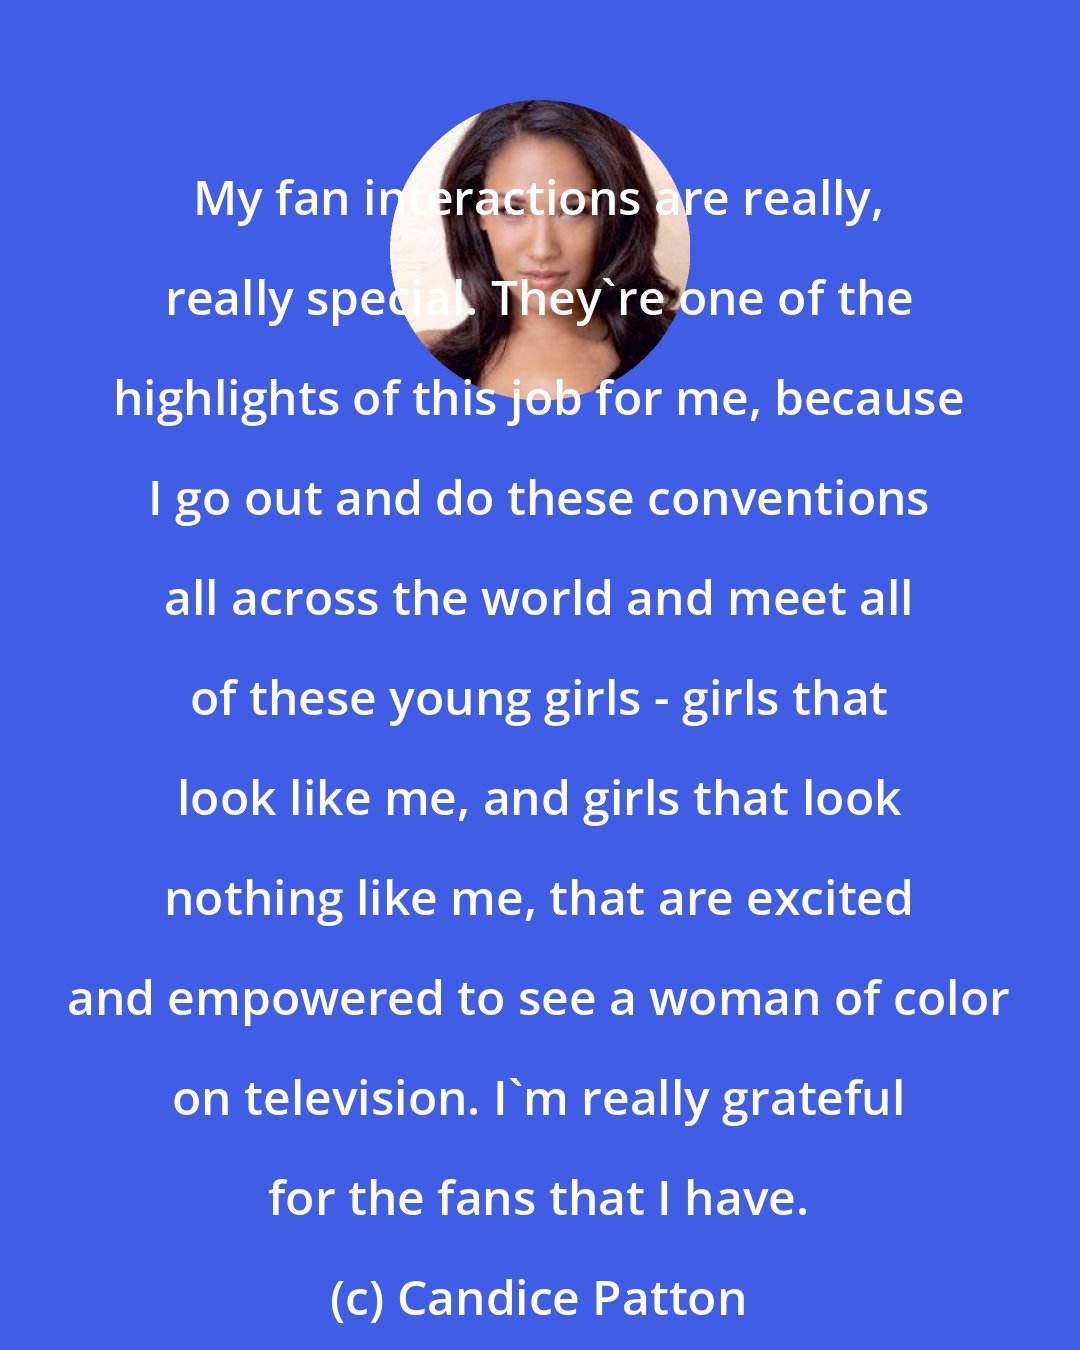 Candice Patton: My fan interactions are really, really special. They're one of the highlights of this job for me, because I go out and do these conventions all across the world and meet all of these young girls - girls that look like me, and girls that look nothing like me, that are excited and empowered to see a woman of color on television. I'm really grateful for the fans that I have.